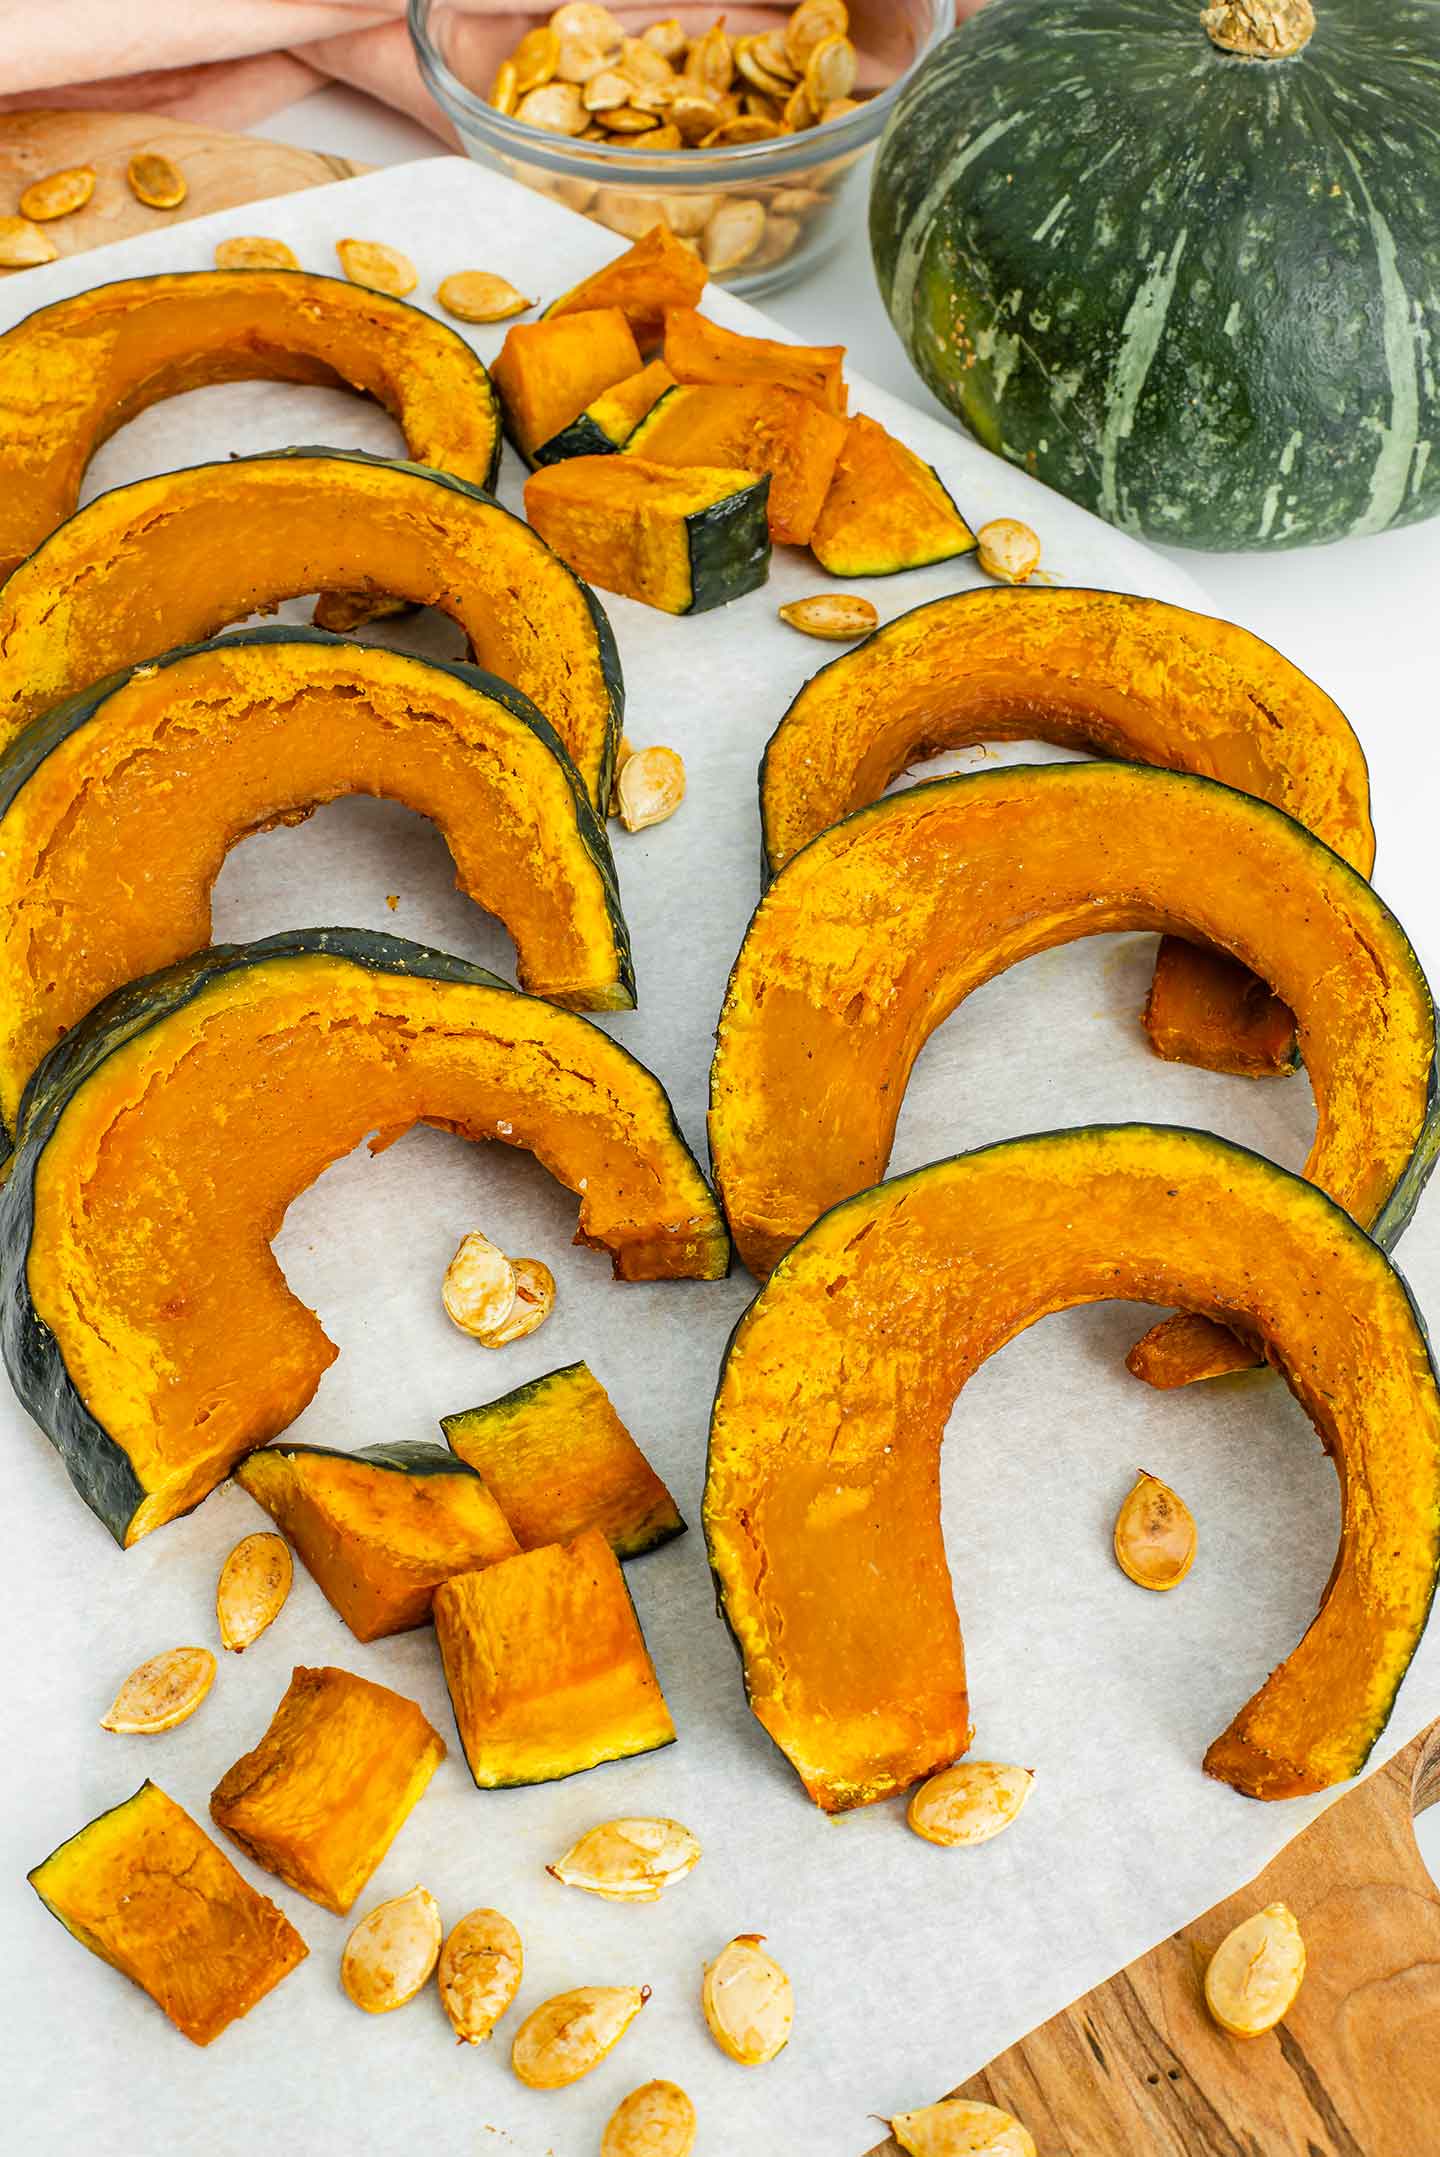 Sliced roasted kabocha squash lines a white tray. A small whole kabocha squash is pictured to show its green colour, and squat shape.